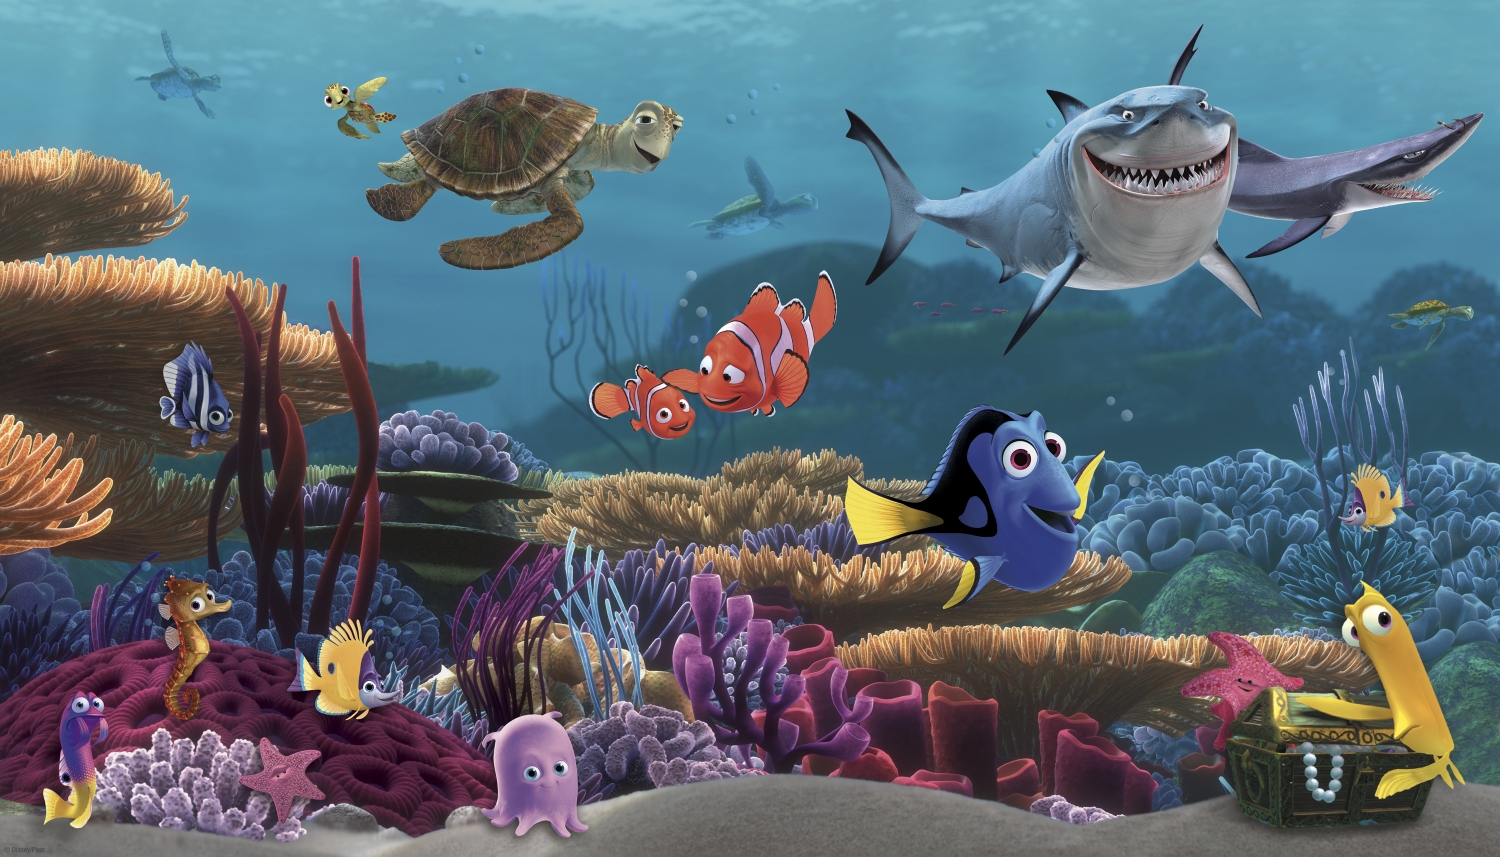 Jl1278m Finding Nemo Prepasted Xl Sized Wallpaper Mural